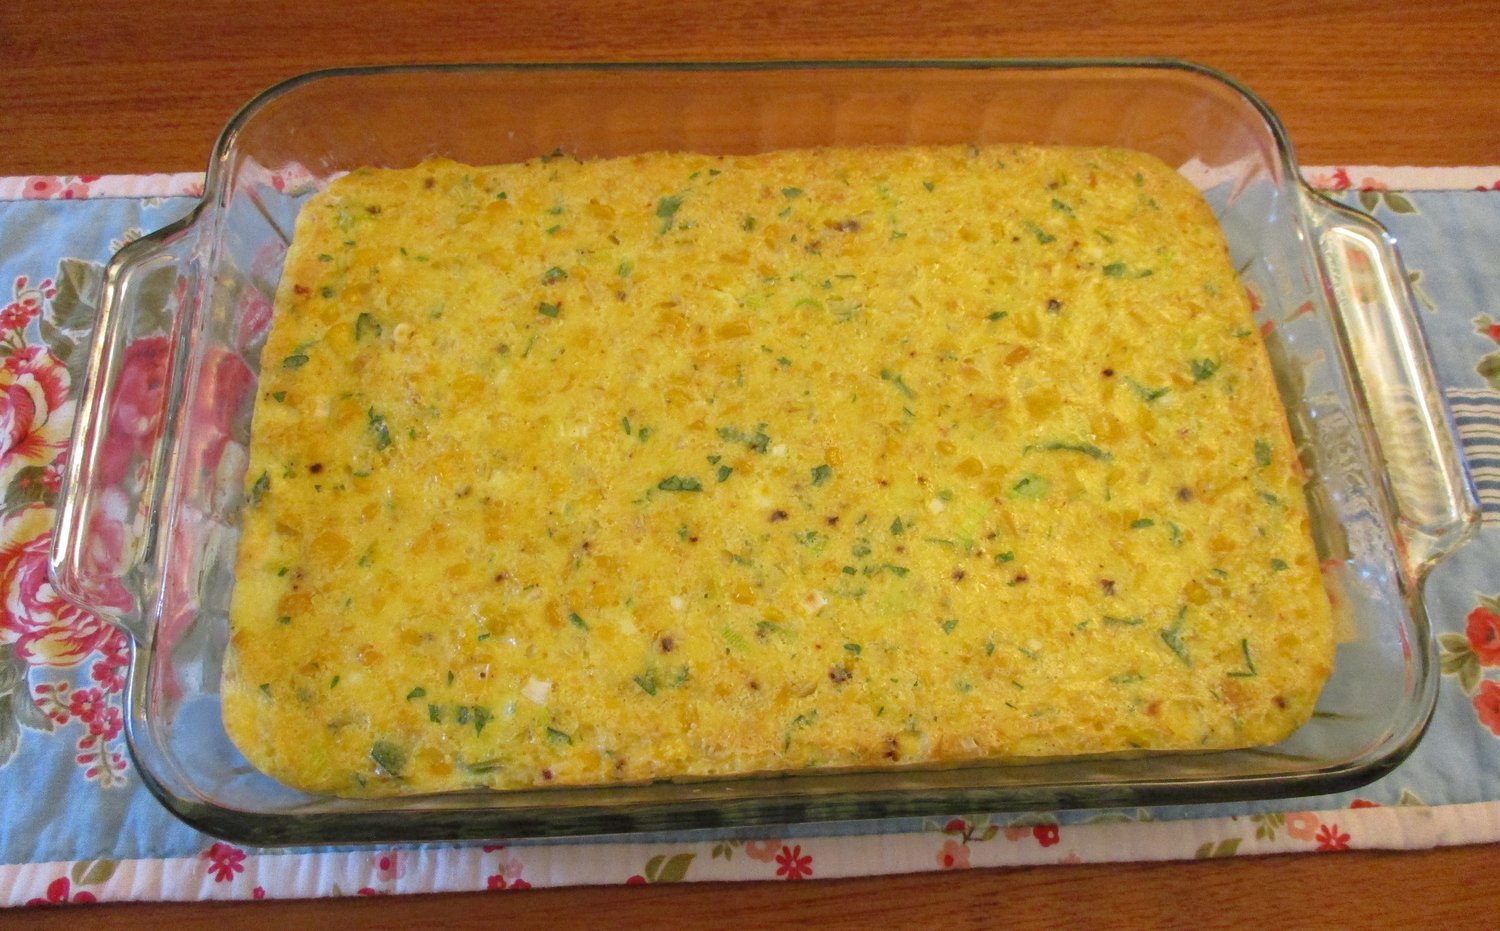 The completed savory corn pudding.